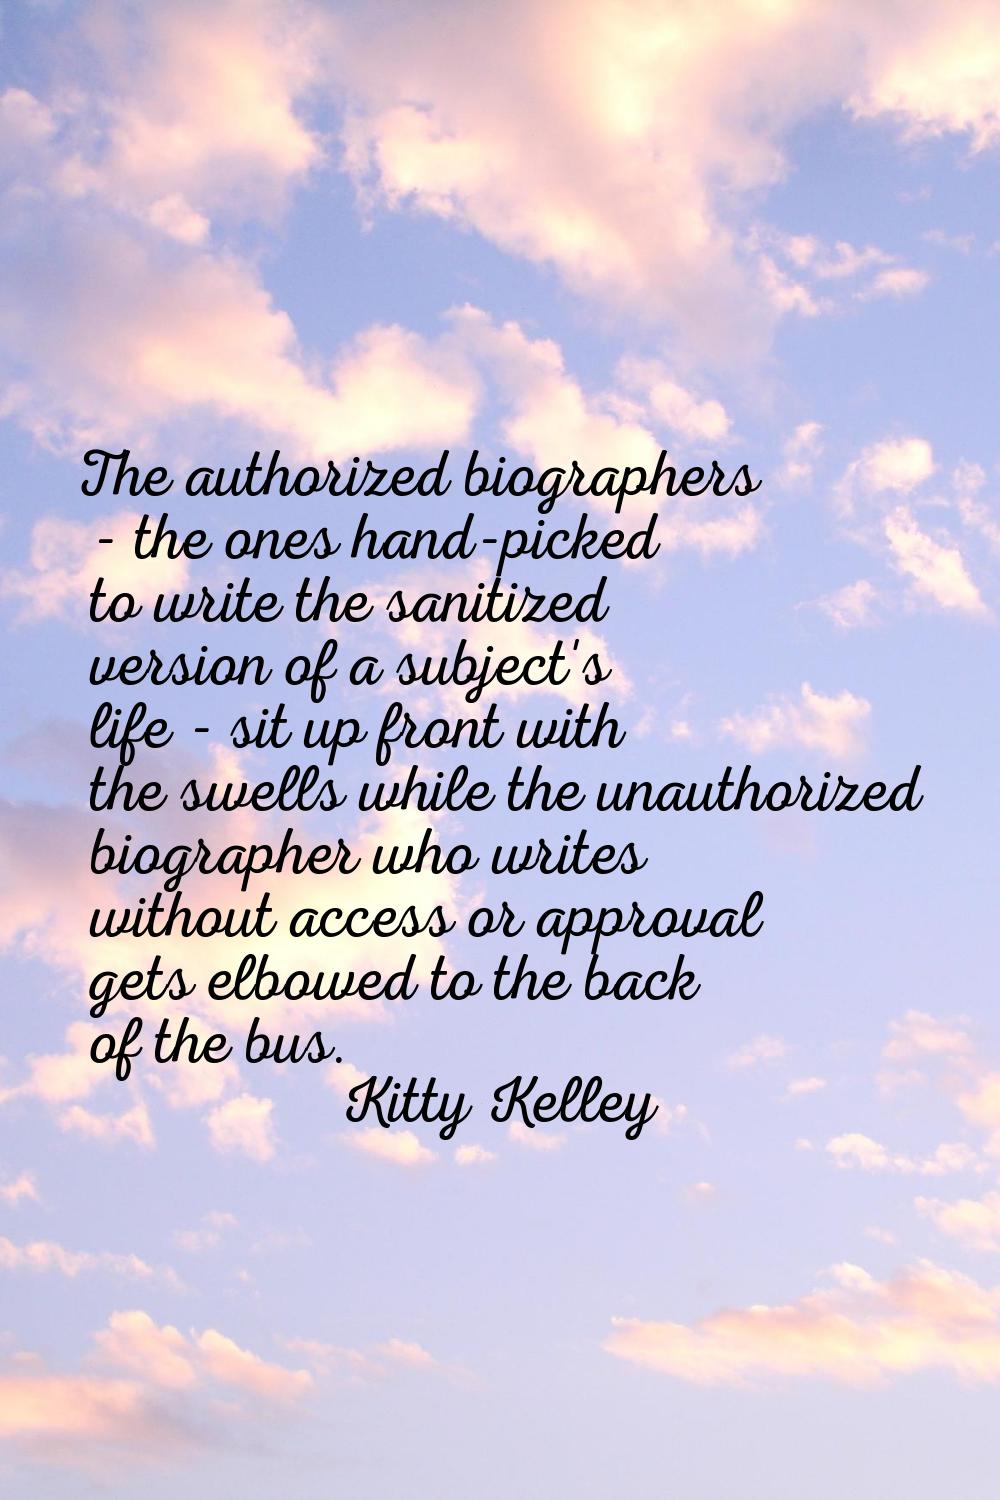 The authorized biographers - the ones hand-picked to write the sanitized version of a subject's lif